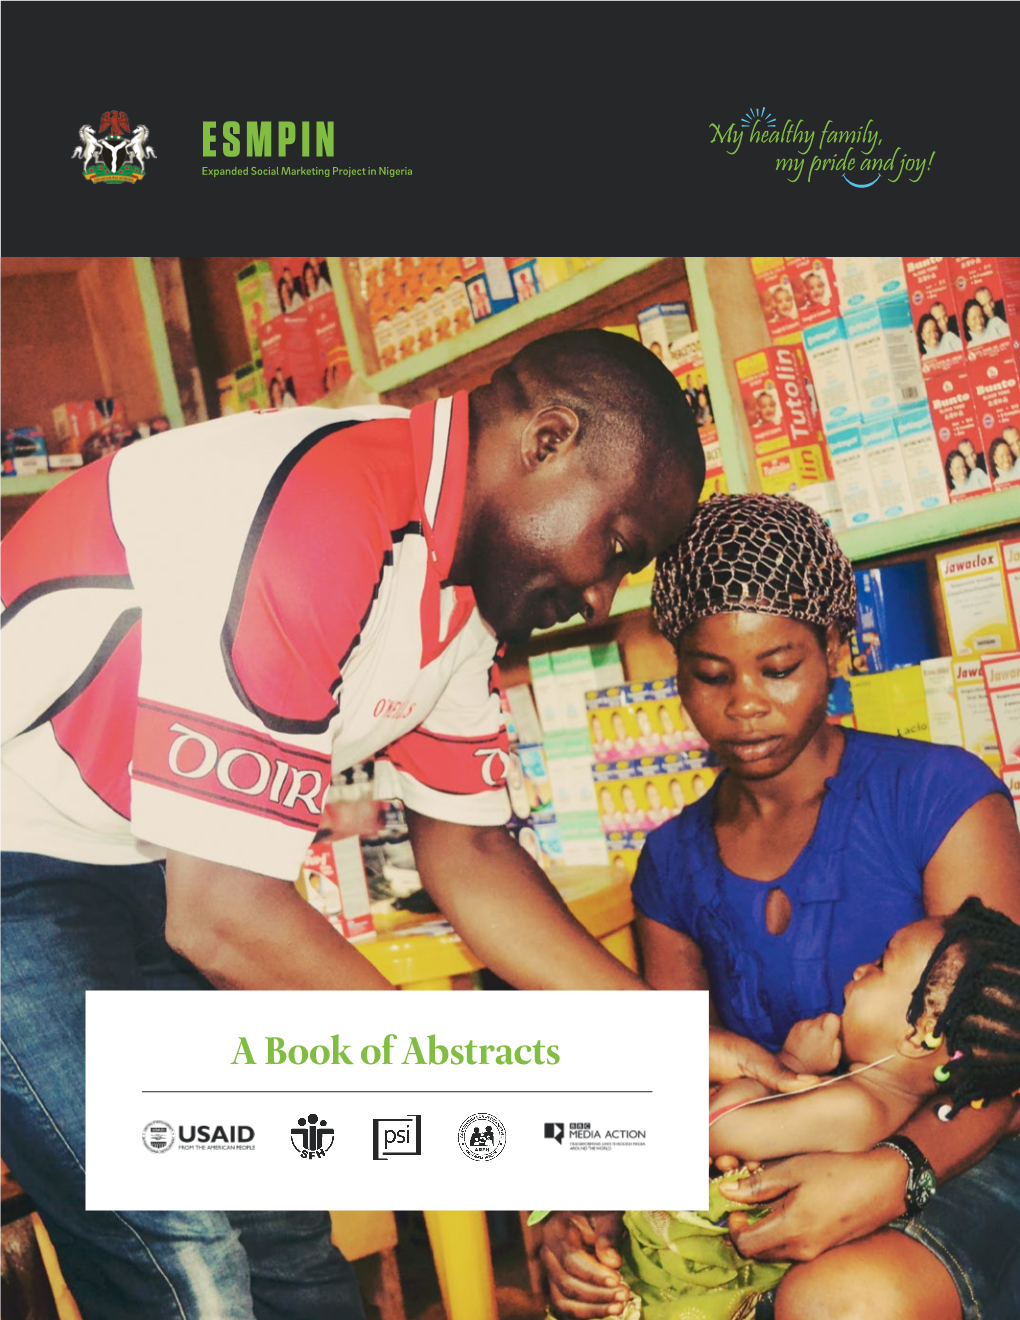 ESMPIN Expanded Social Marketing Project in Nigeria